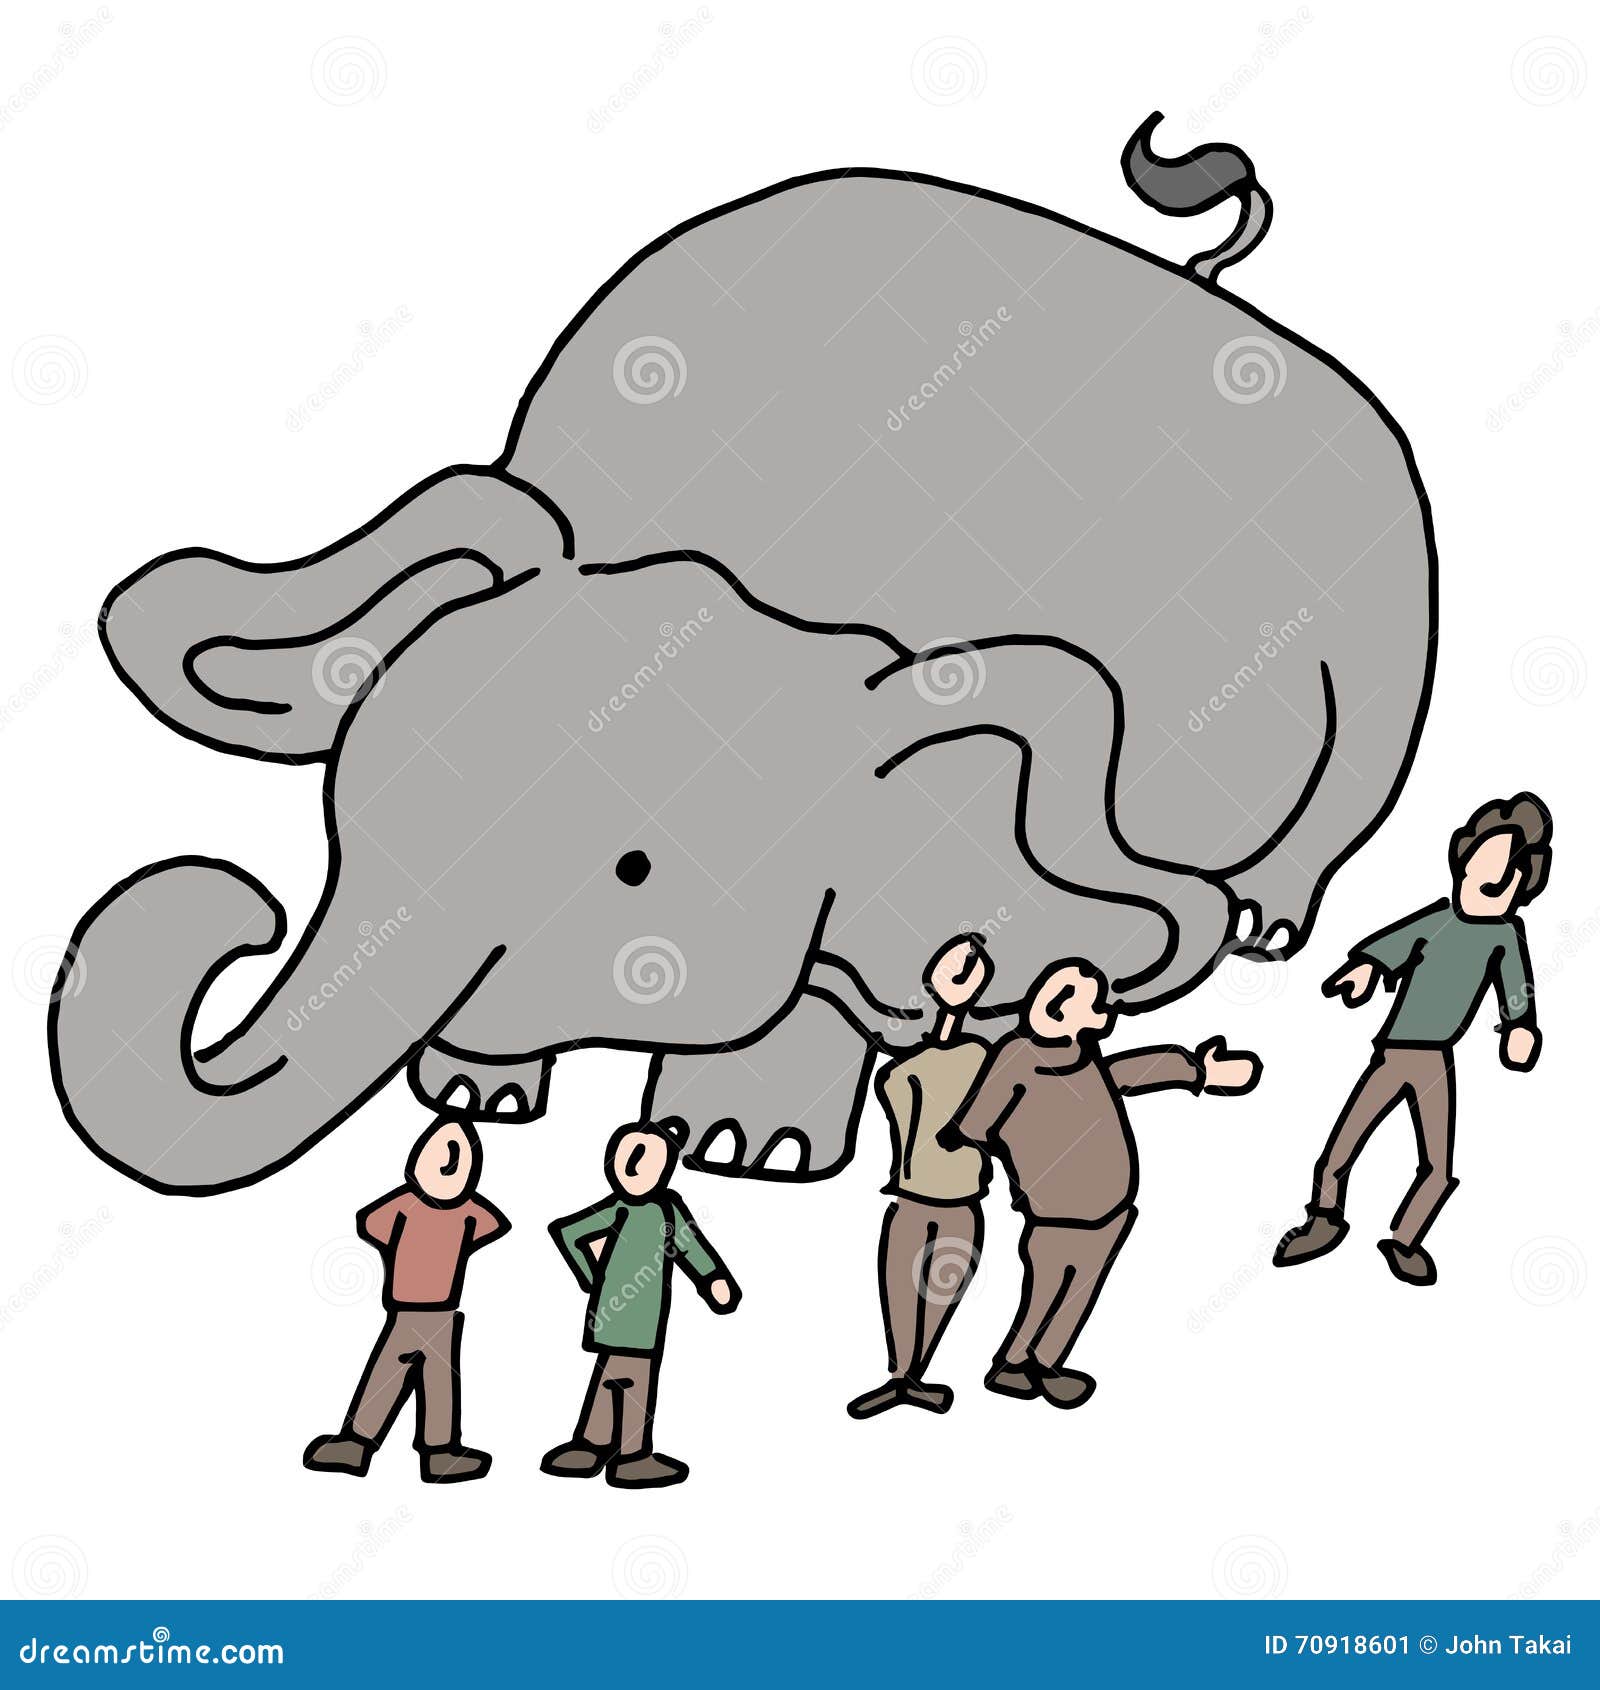 elephant in the room clipart - photo #19